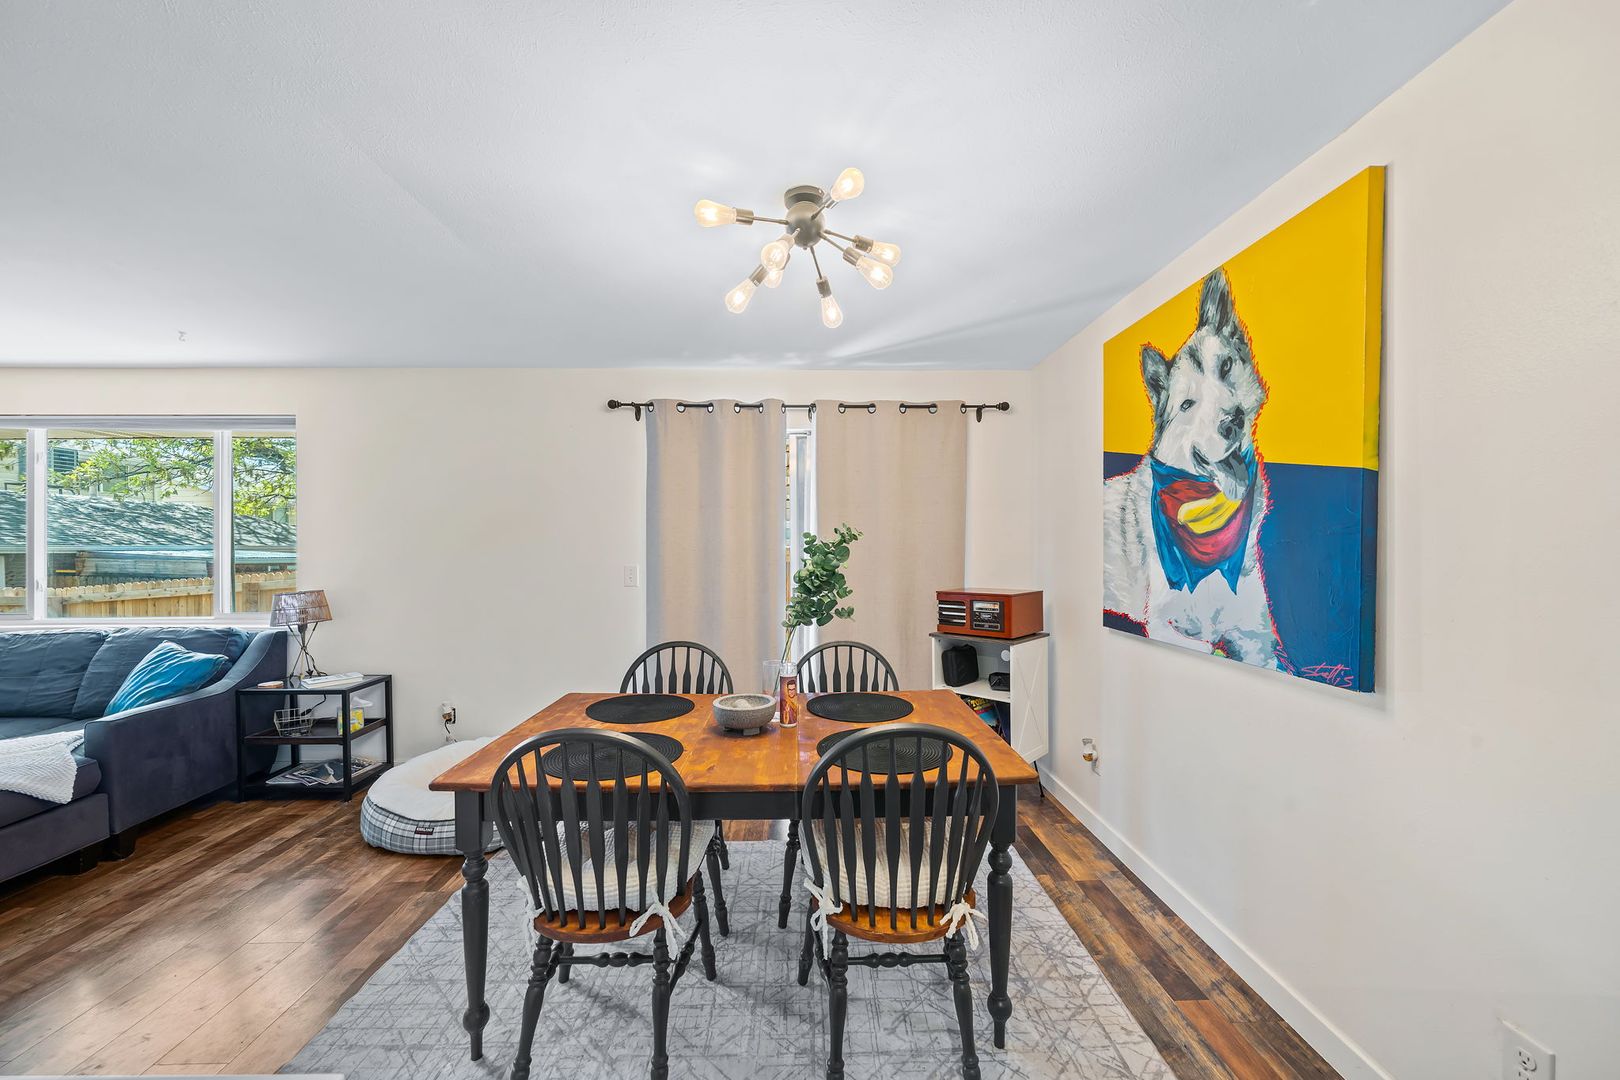 Recently Updated 2BA, 1.5BA Condo with Fenced Yard and Garage Parking Spot